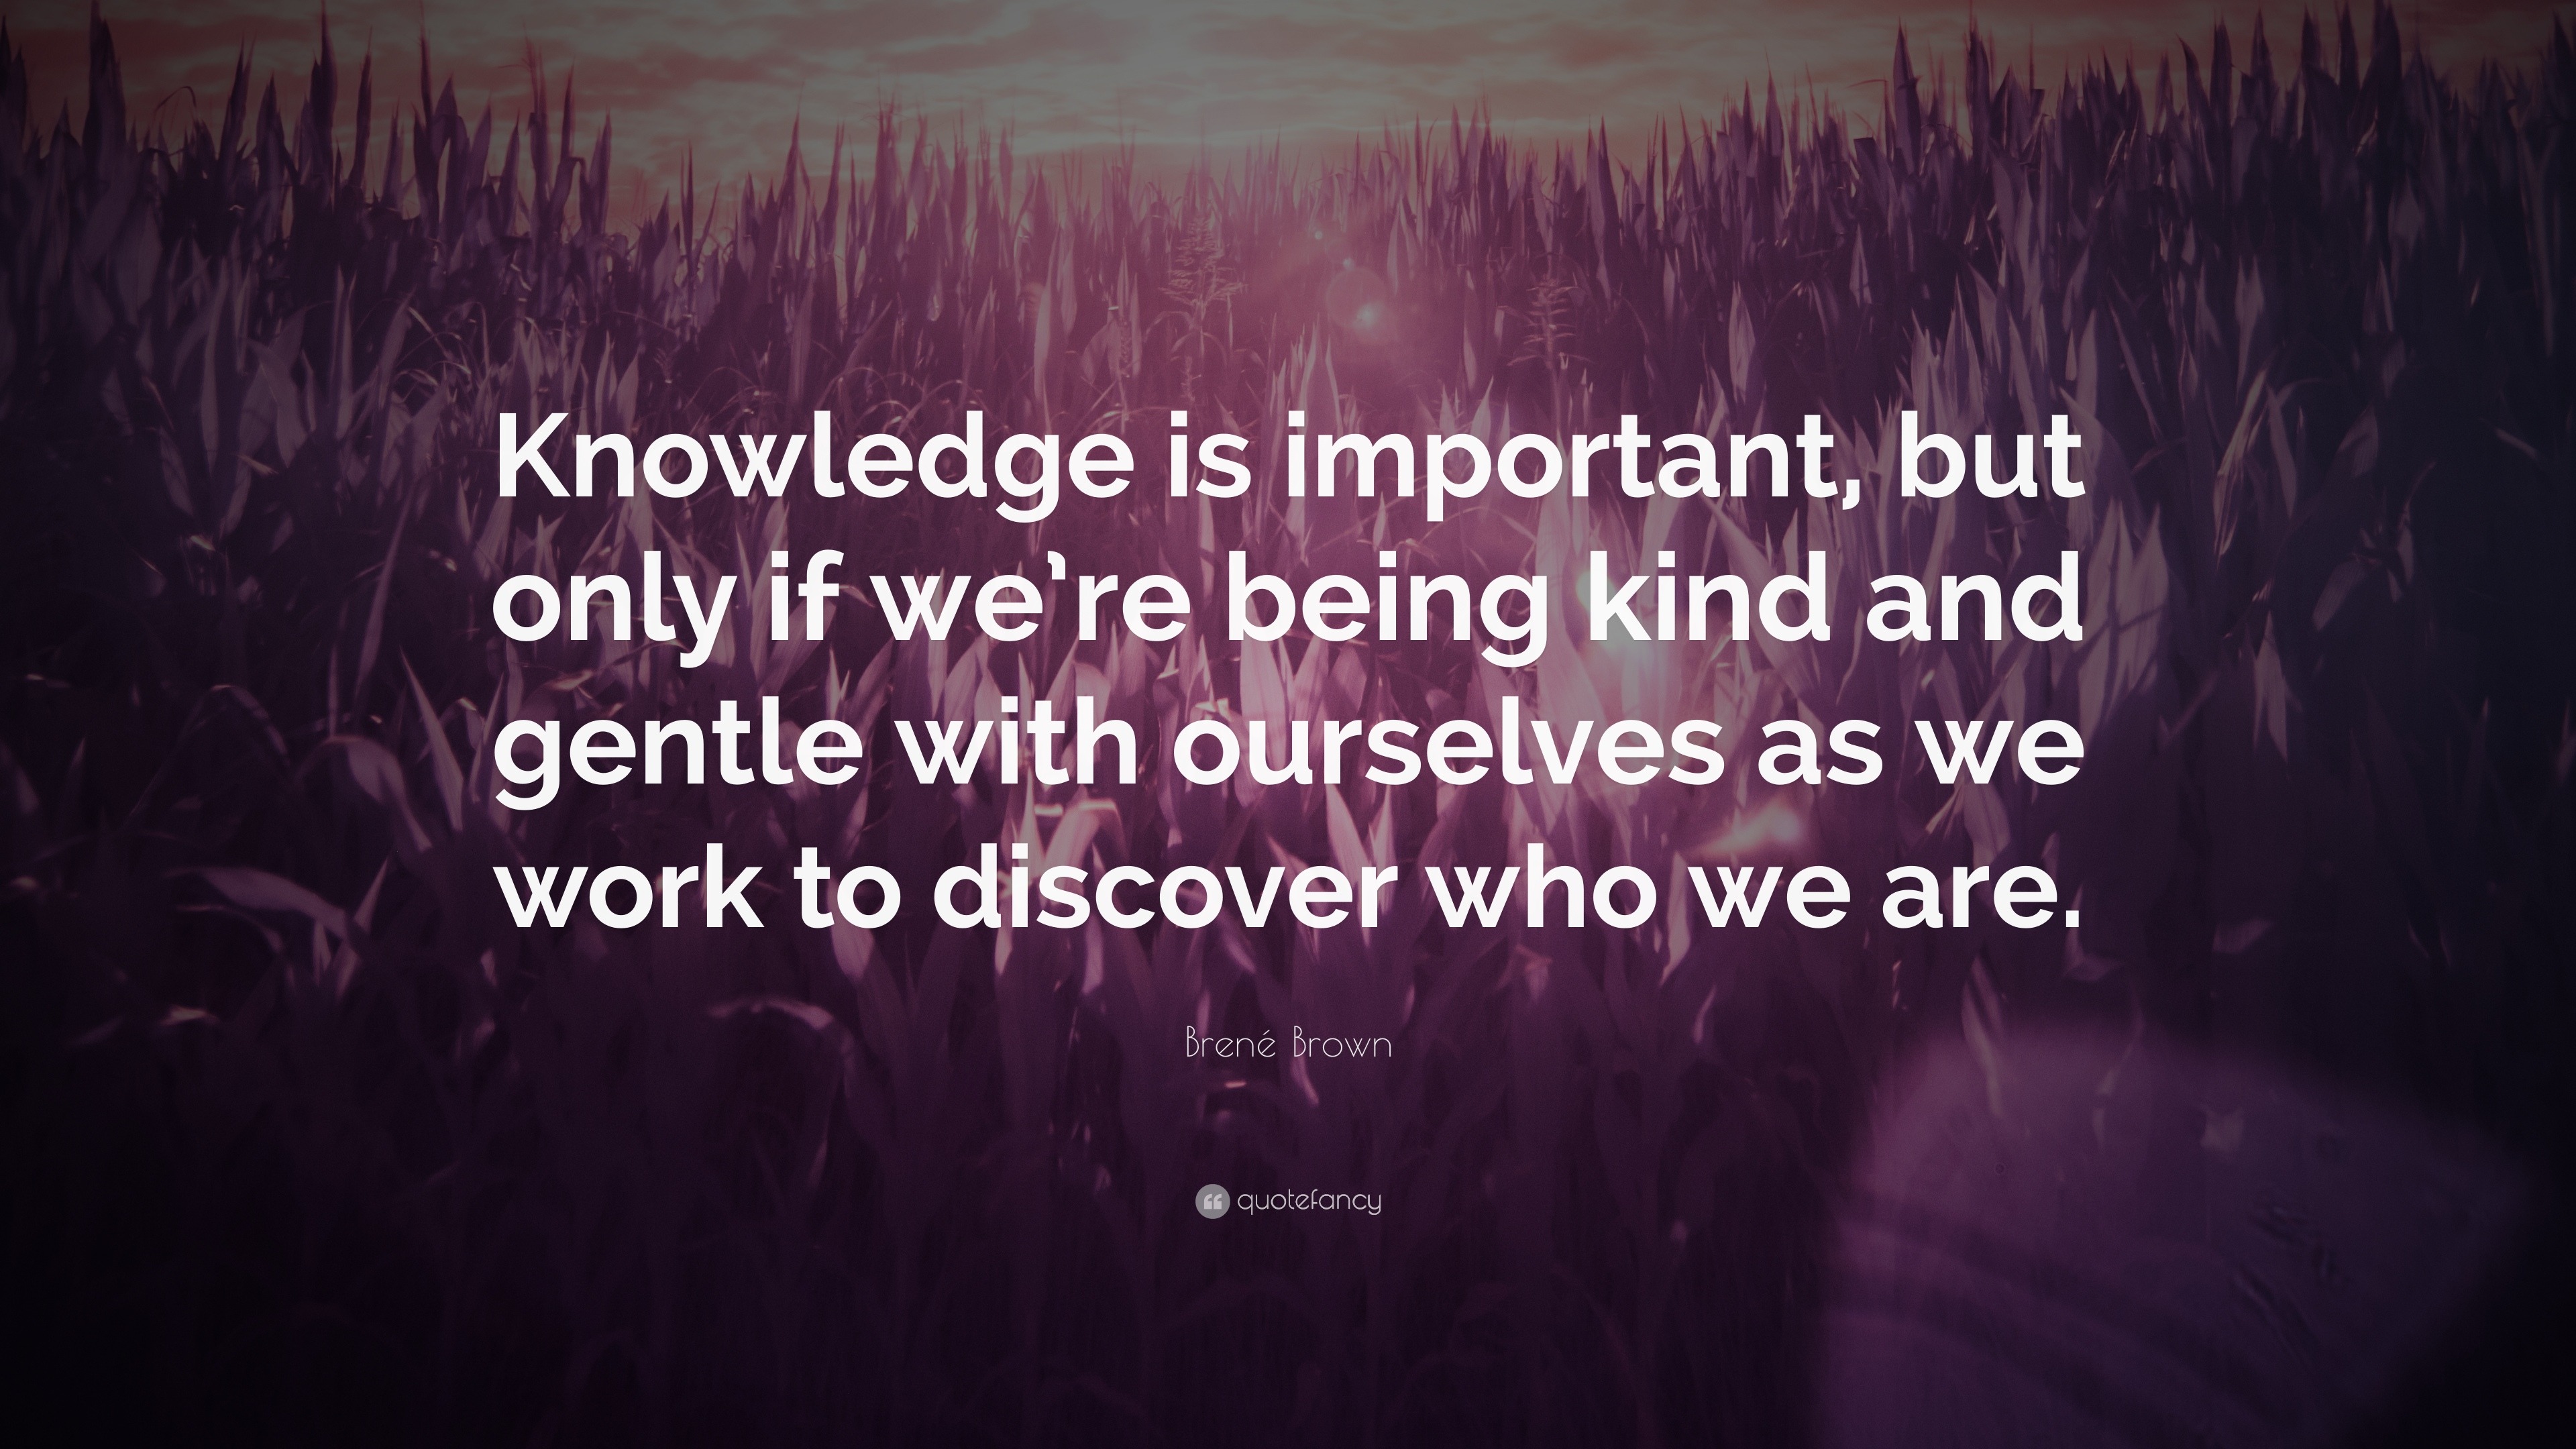 Brené Brown Quote: “Knowledge is important, but only if we’re being